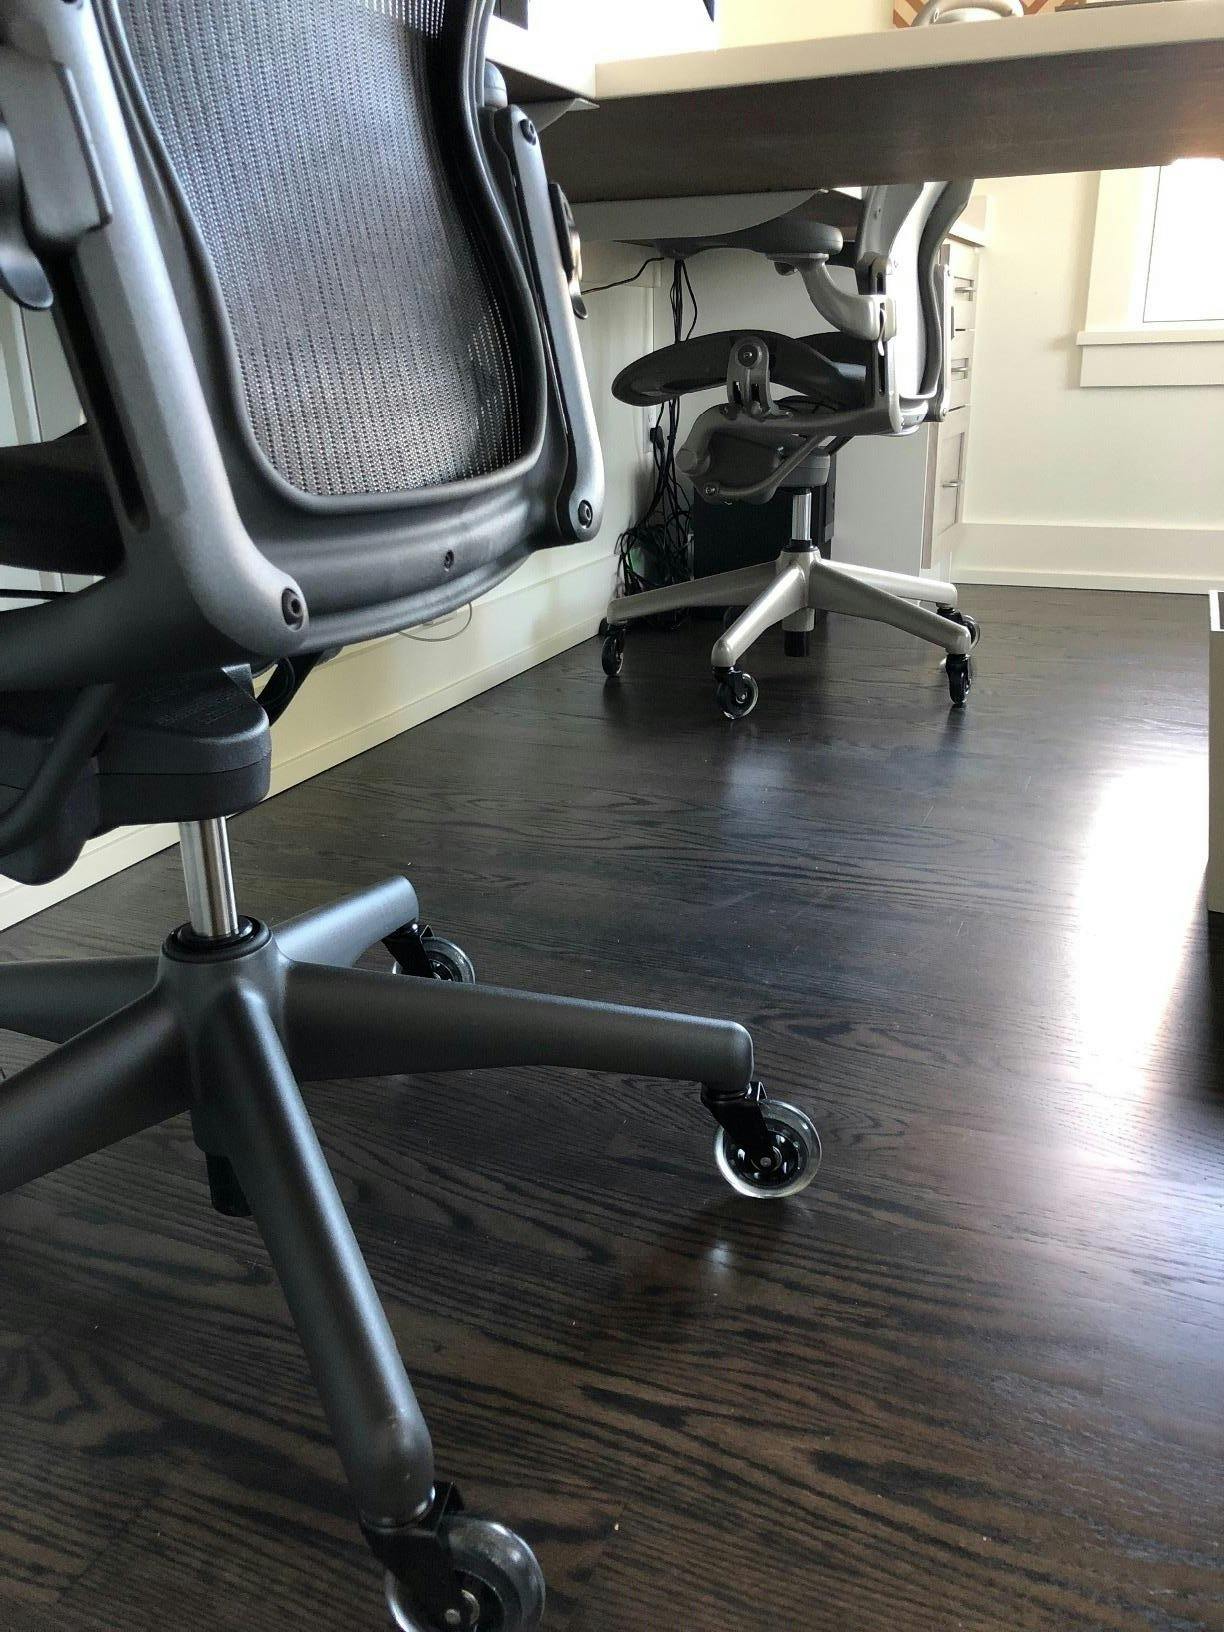 The Office Oasis Premium Office Chair Caster Wheel Top Sellers, 55% OFF |  www.ingeniovirtual.com